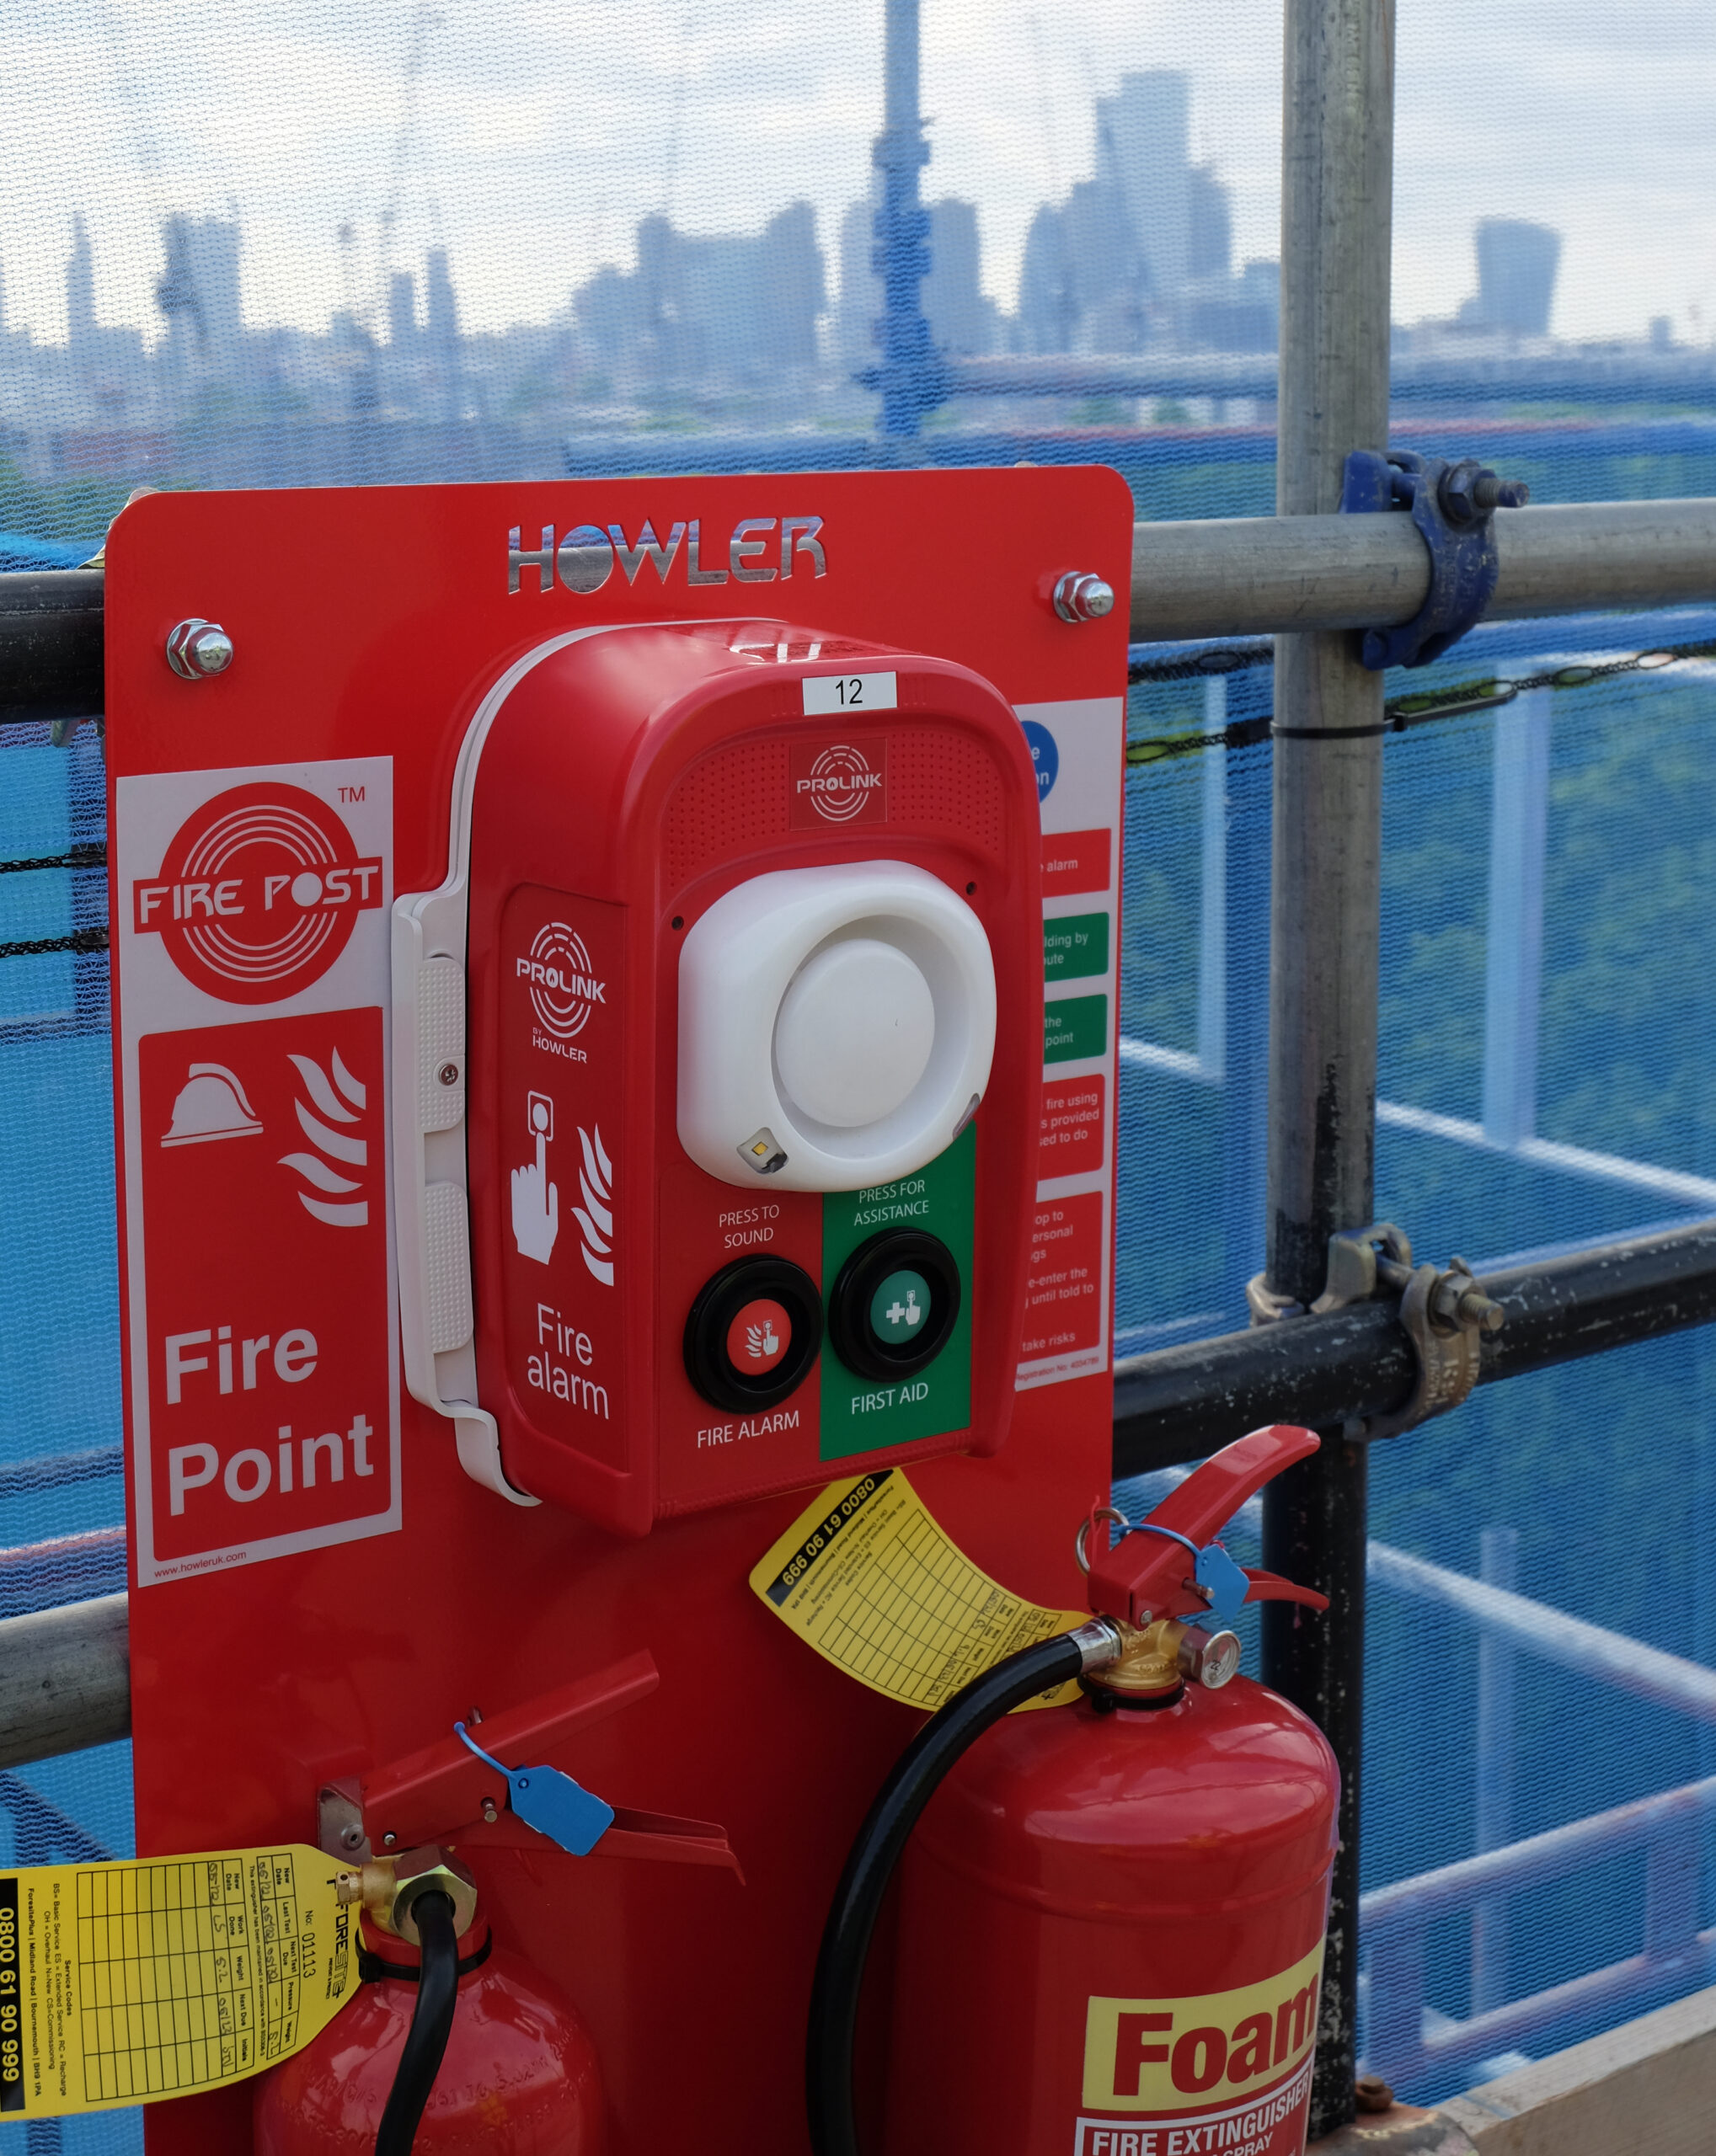 http://howler%20scaffpost%20fire%20point%20with%20prolink%20and%20two%20fire%20extinguishers